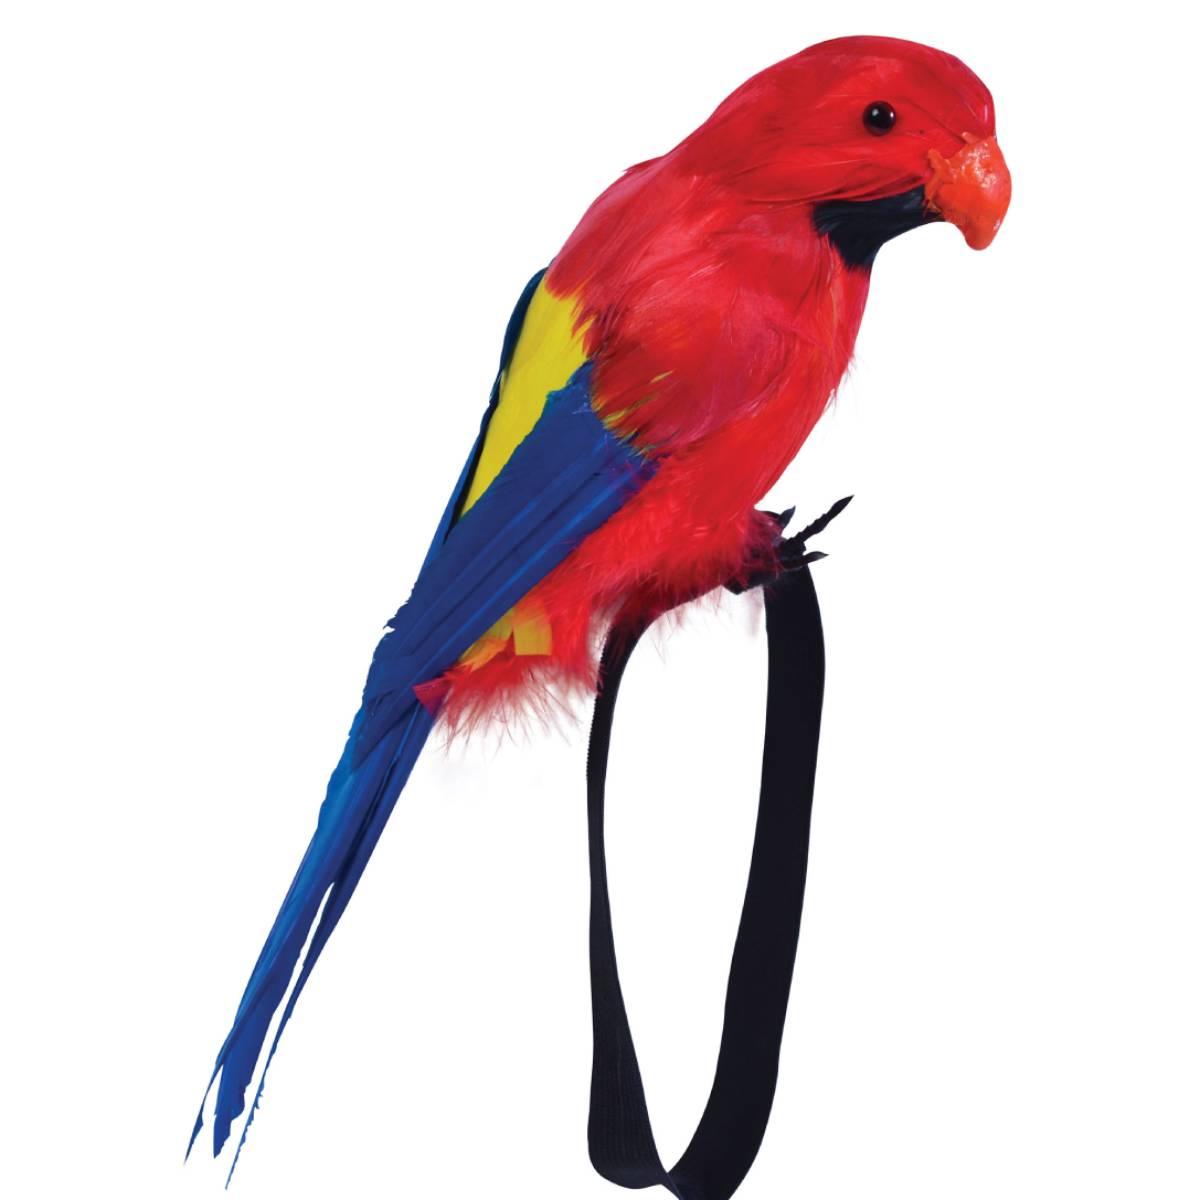 30cm Feathered Parrot for the Wrist by Bristol Novelties BA351 available here at Karnival Costumes online party shop